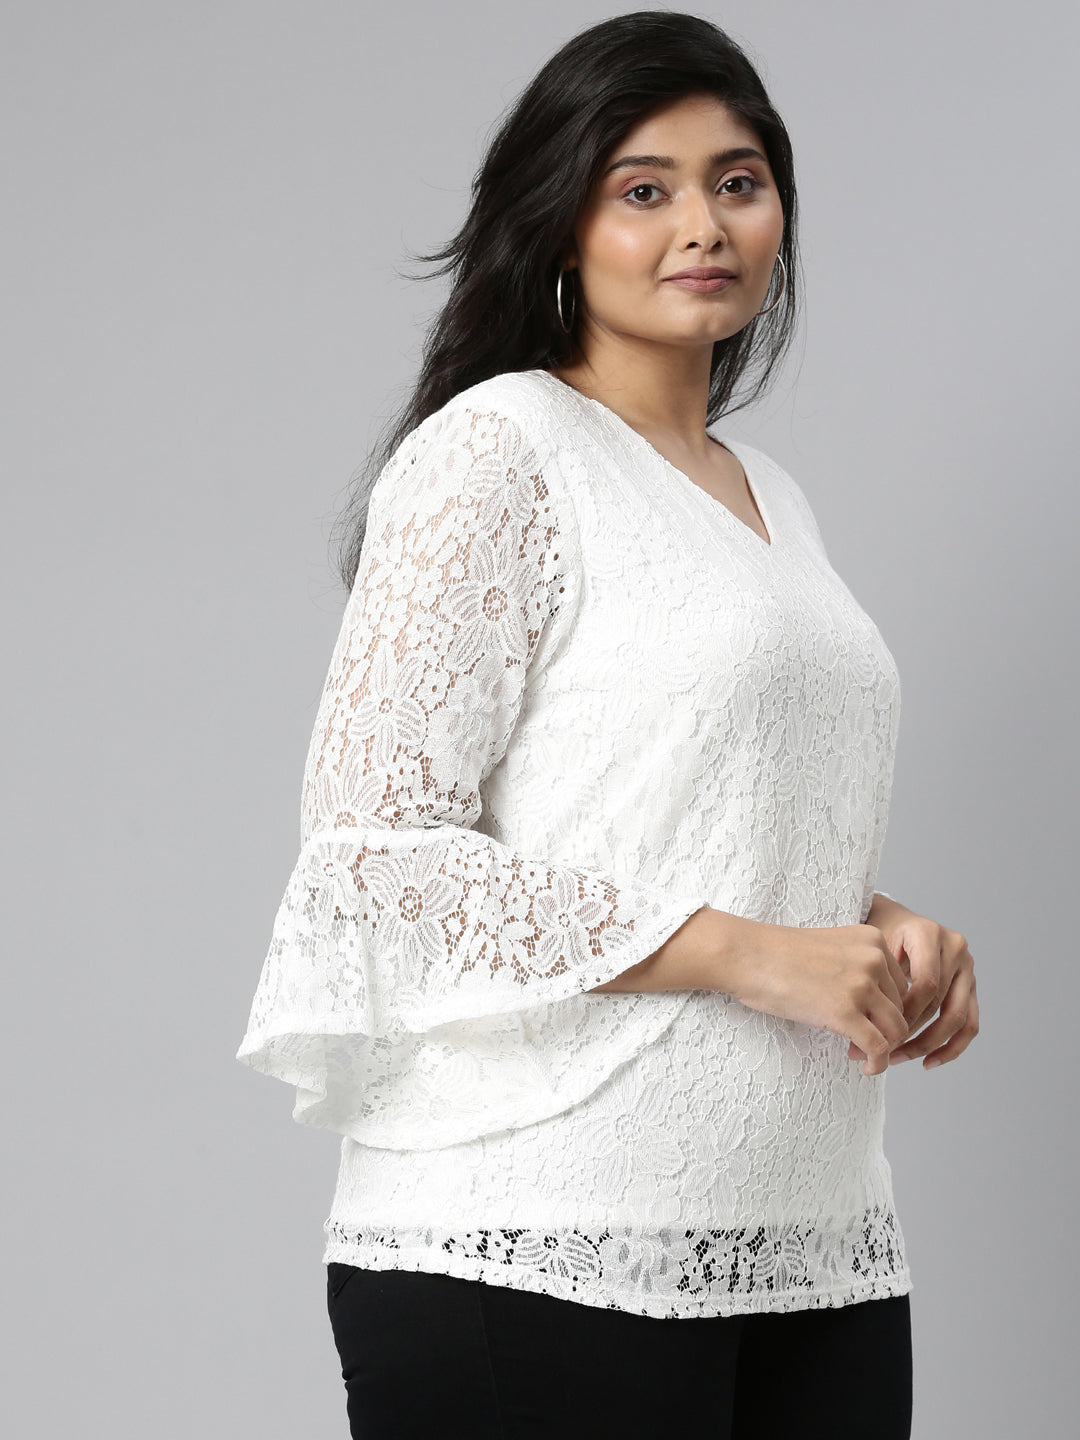 WHITE FLORAL LACE TOP